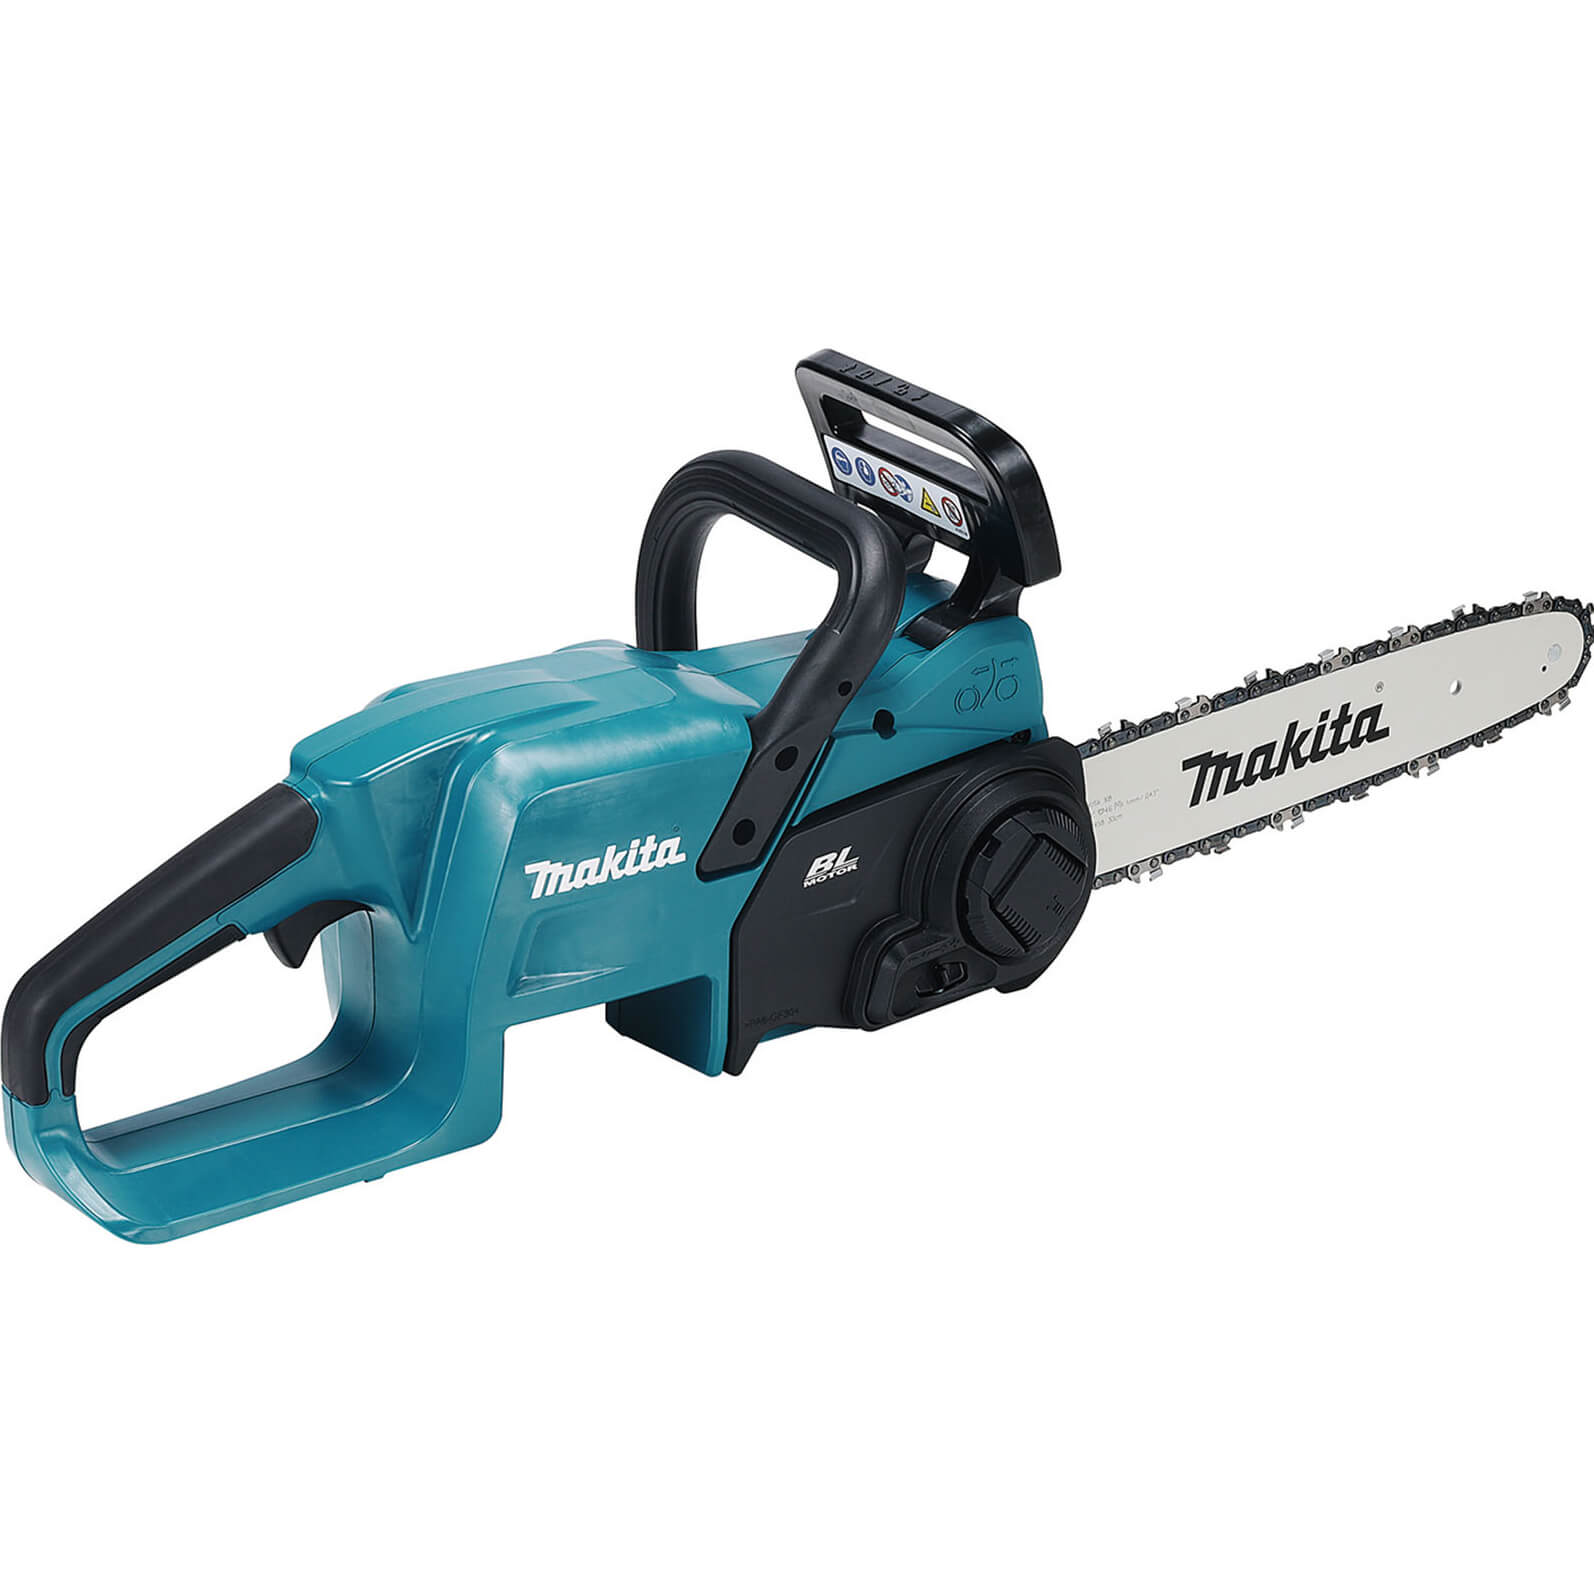 Makita DUC307 18v LXT Cordless Brushless Chainsaw 300mm No Batteries No Charger